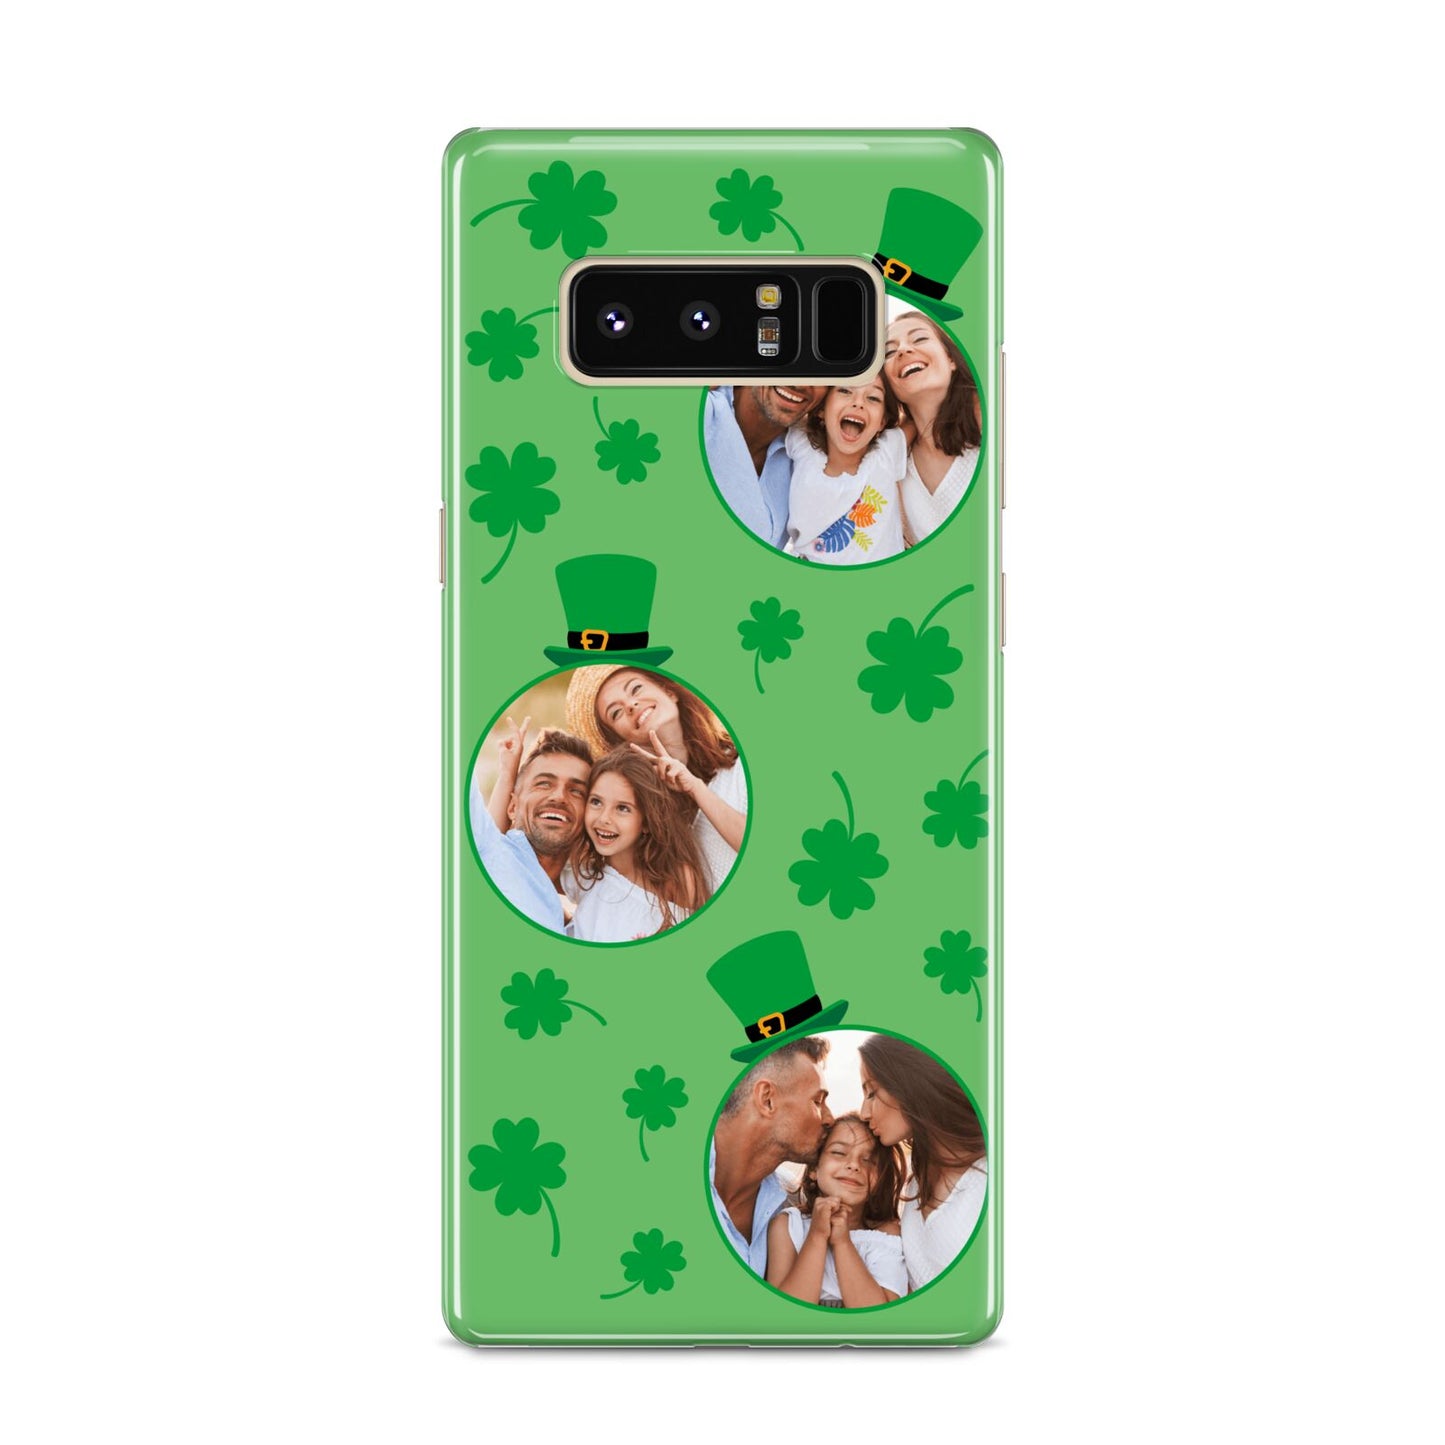 St Patricks Day Personalised Photo Samsung Galaxy S8 Case